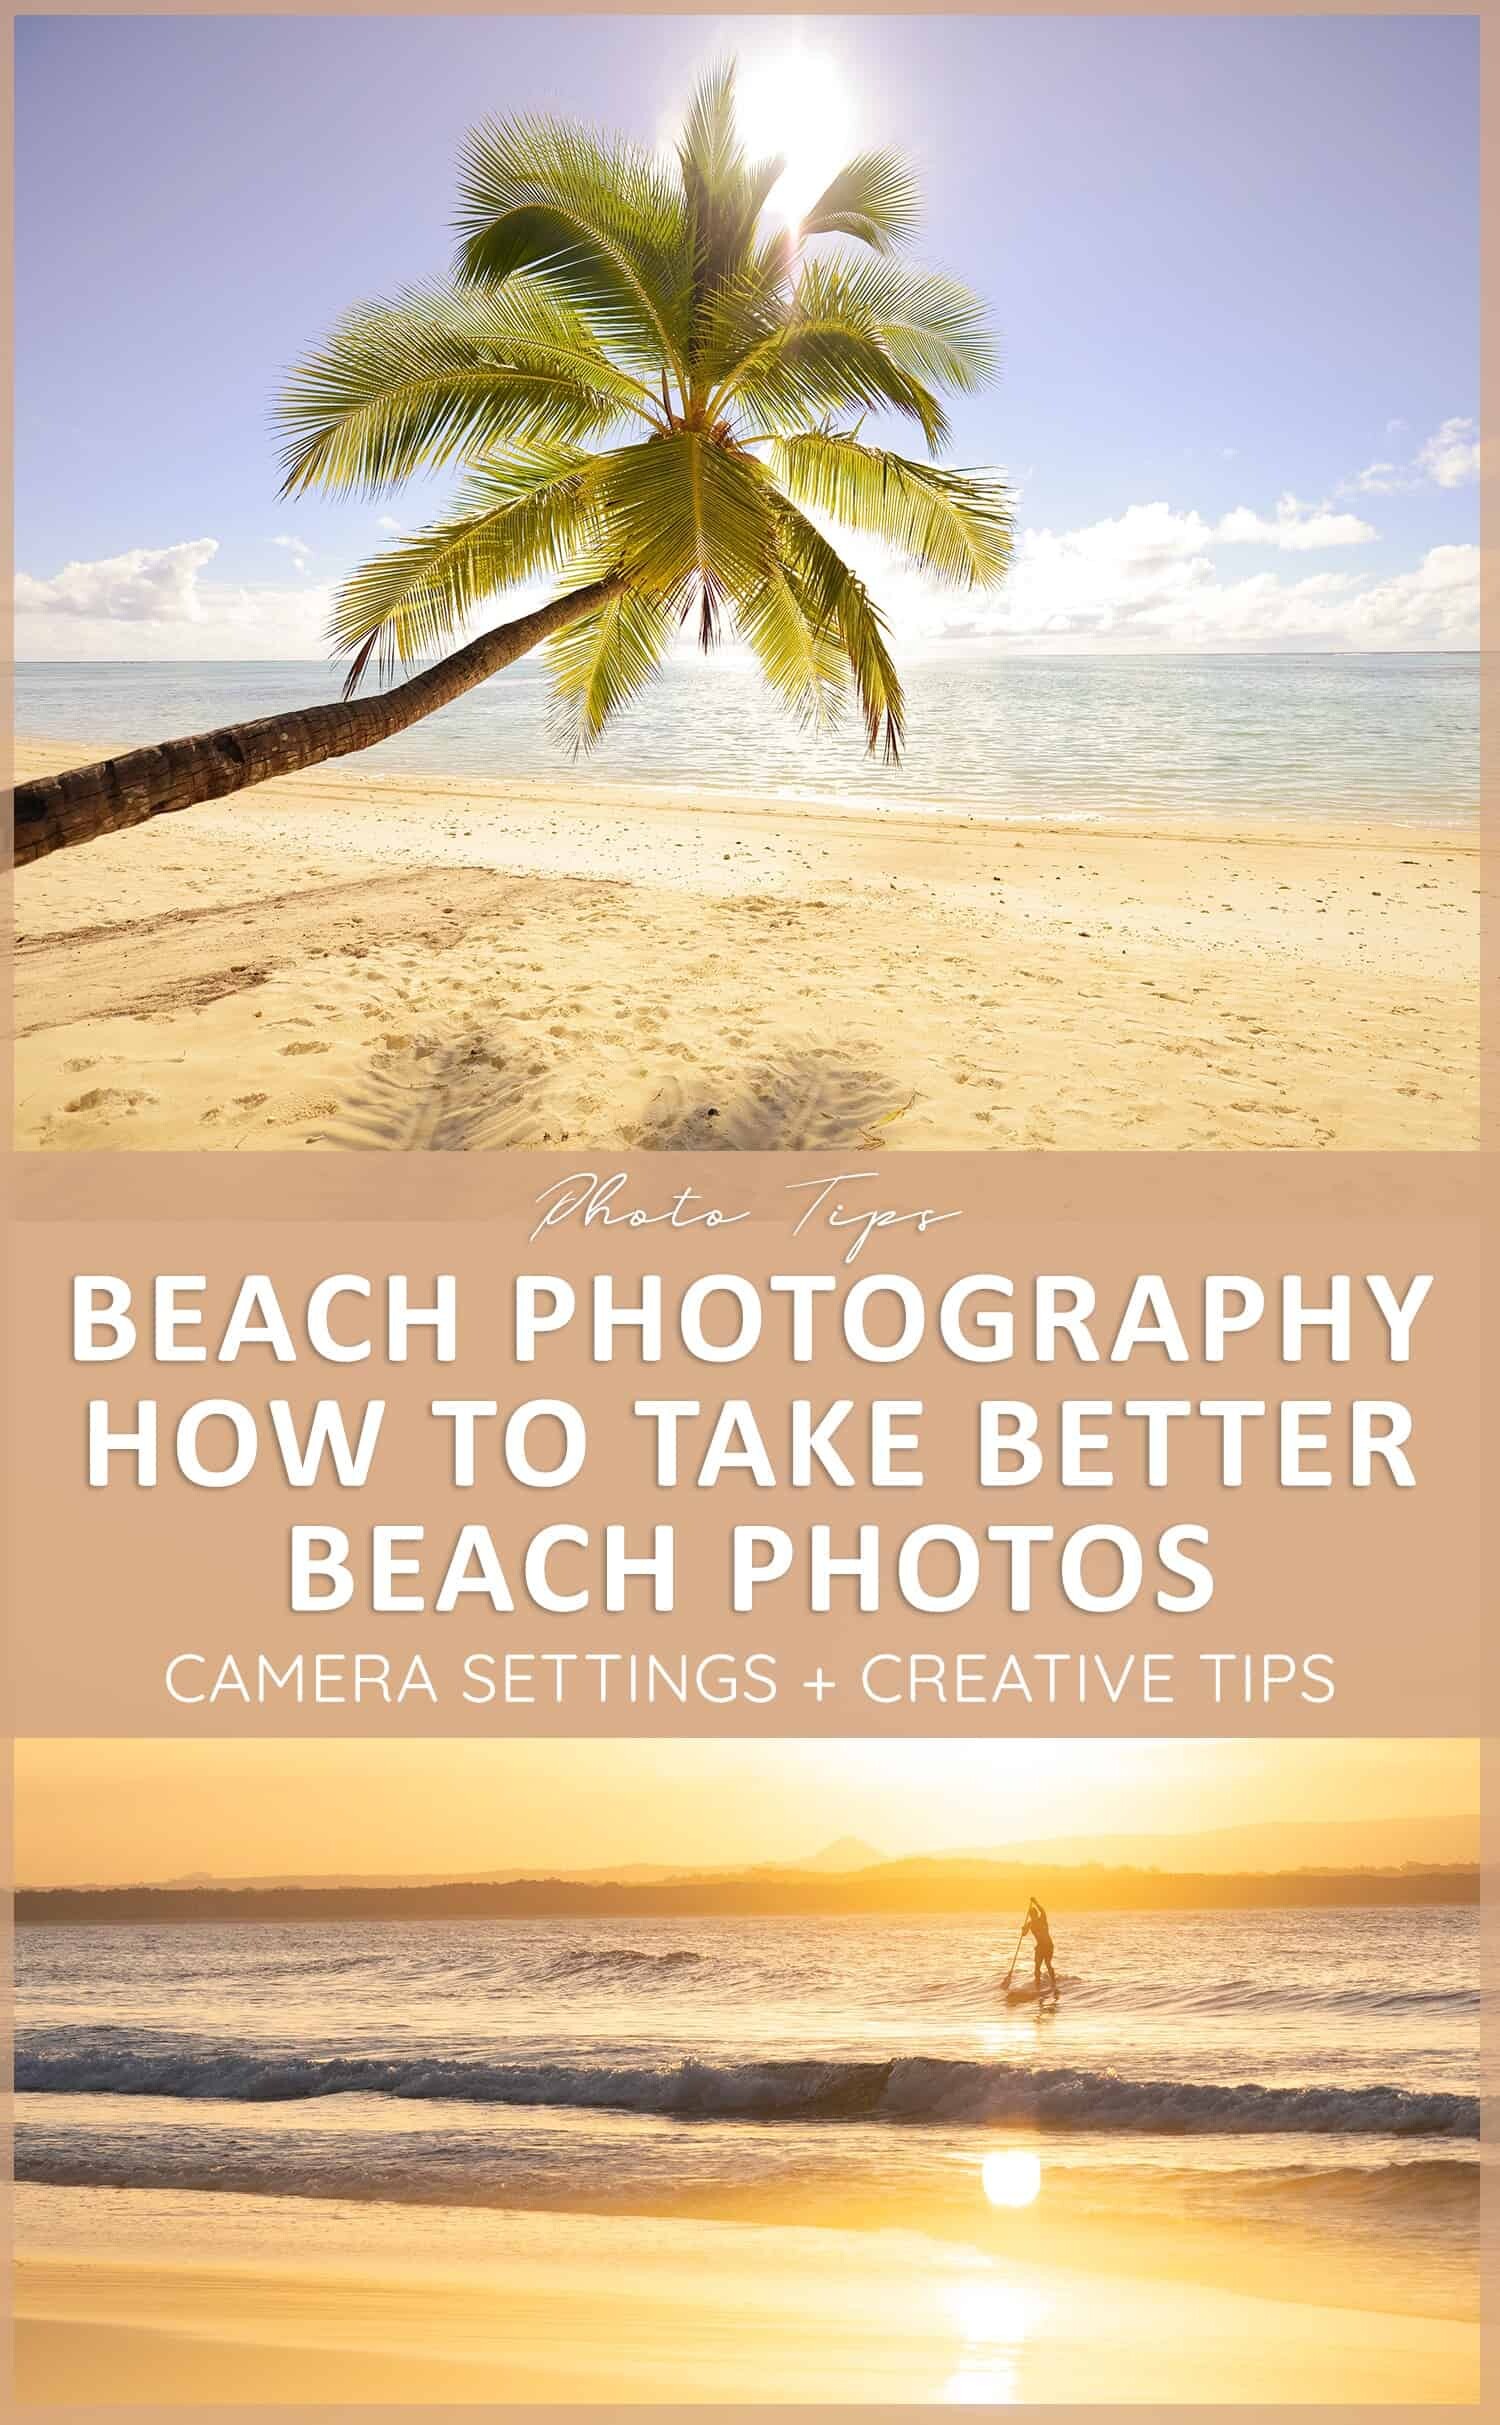 Beach Photography How To Take Better, Beach Landscape Photography Tips